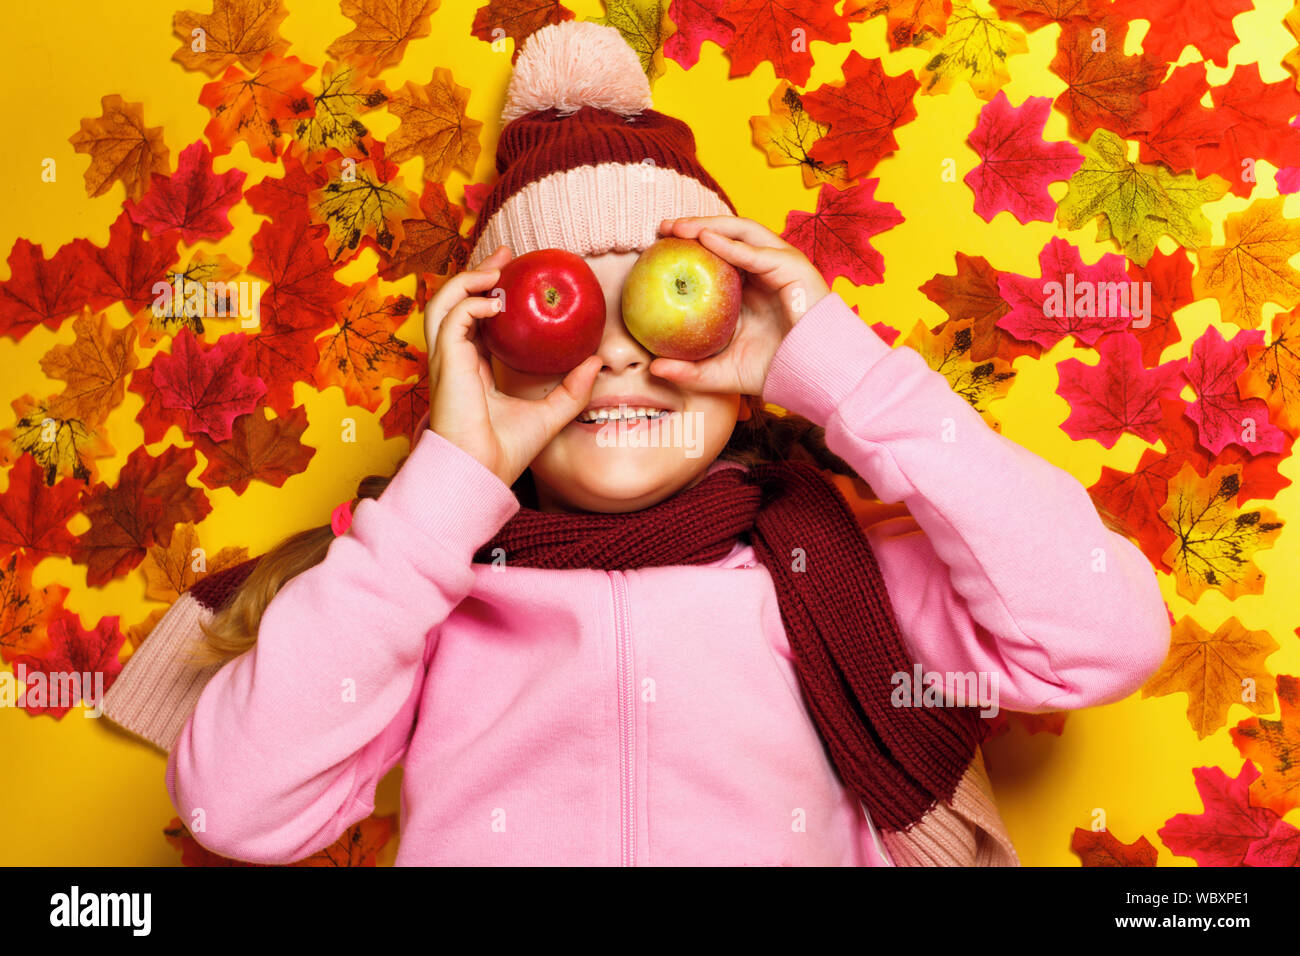 Top view of a happy little girl lying on autumn leaves. A child in a scarf and hat. Stock Photo